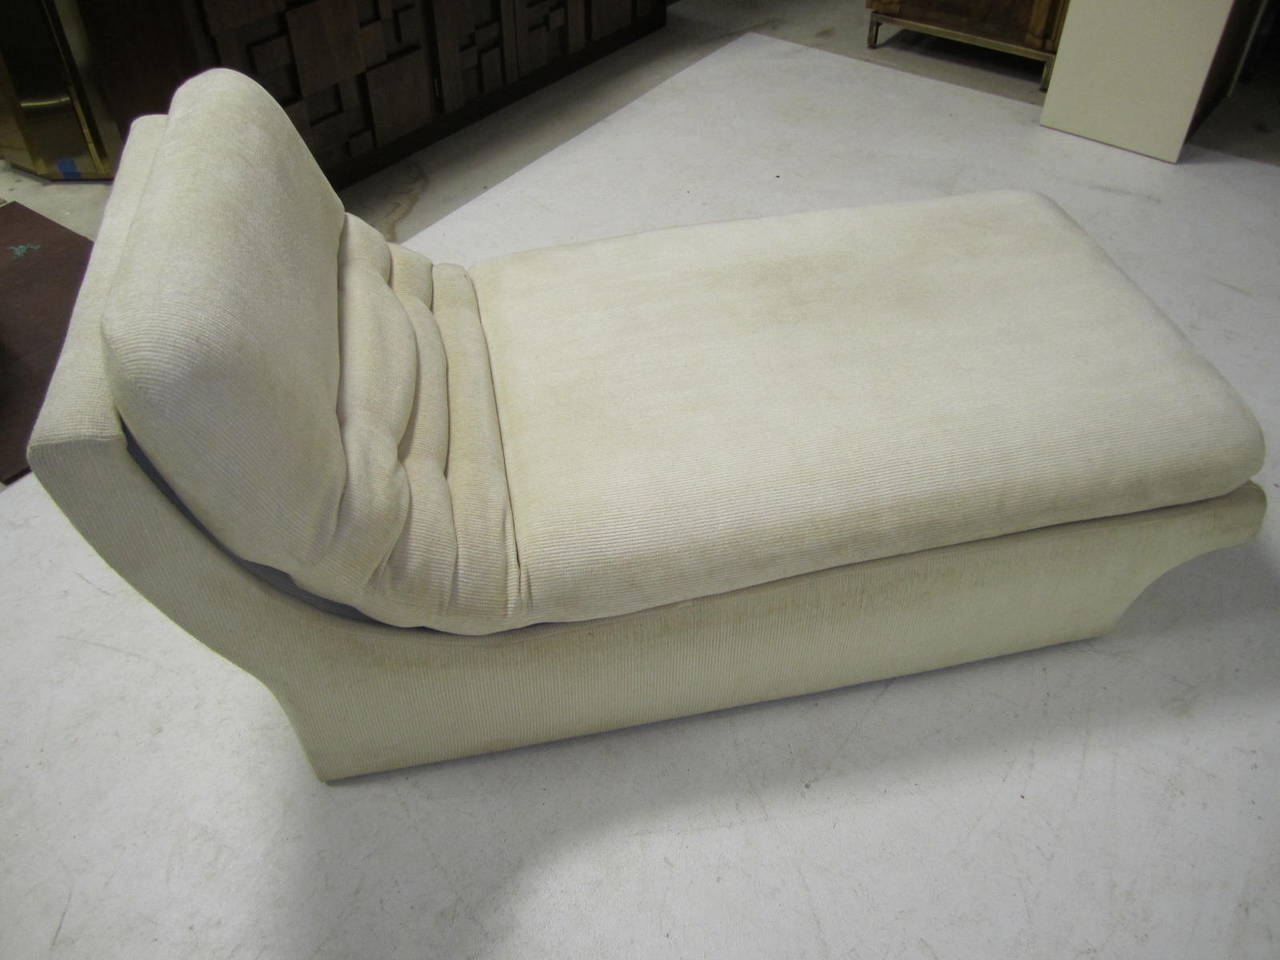 Beautiful lounge chaise in the style of Vladimir Kagan.
The chaise is very comfortable and is the perfect chair for those lazy days to lounge around and read a good book.

The chair retains the original fabric which is in poor condition with some